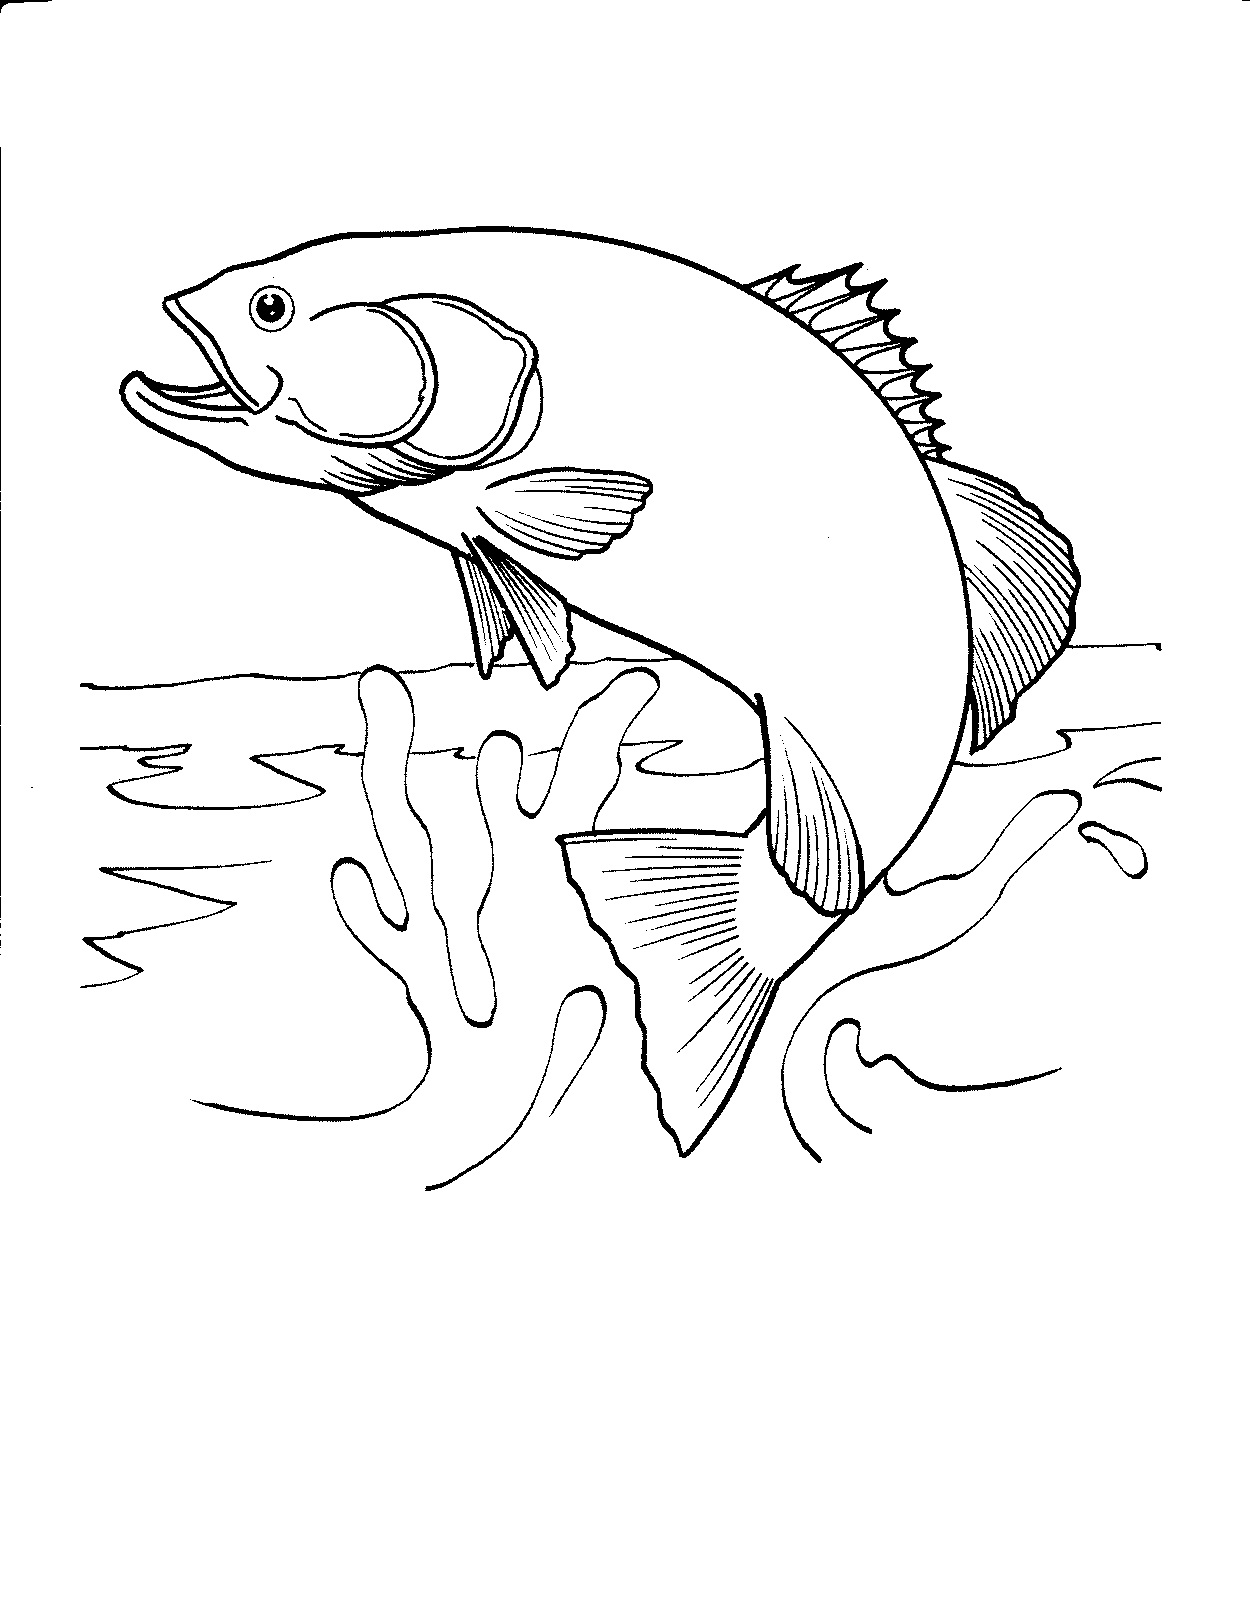 Free Printable Fish Coloring Pages For Kids Coloring Wallpapers Download Free Images Wallpaper [coloring654.blogspot.com]